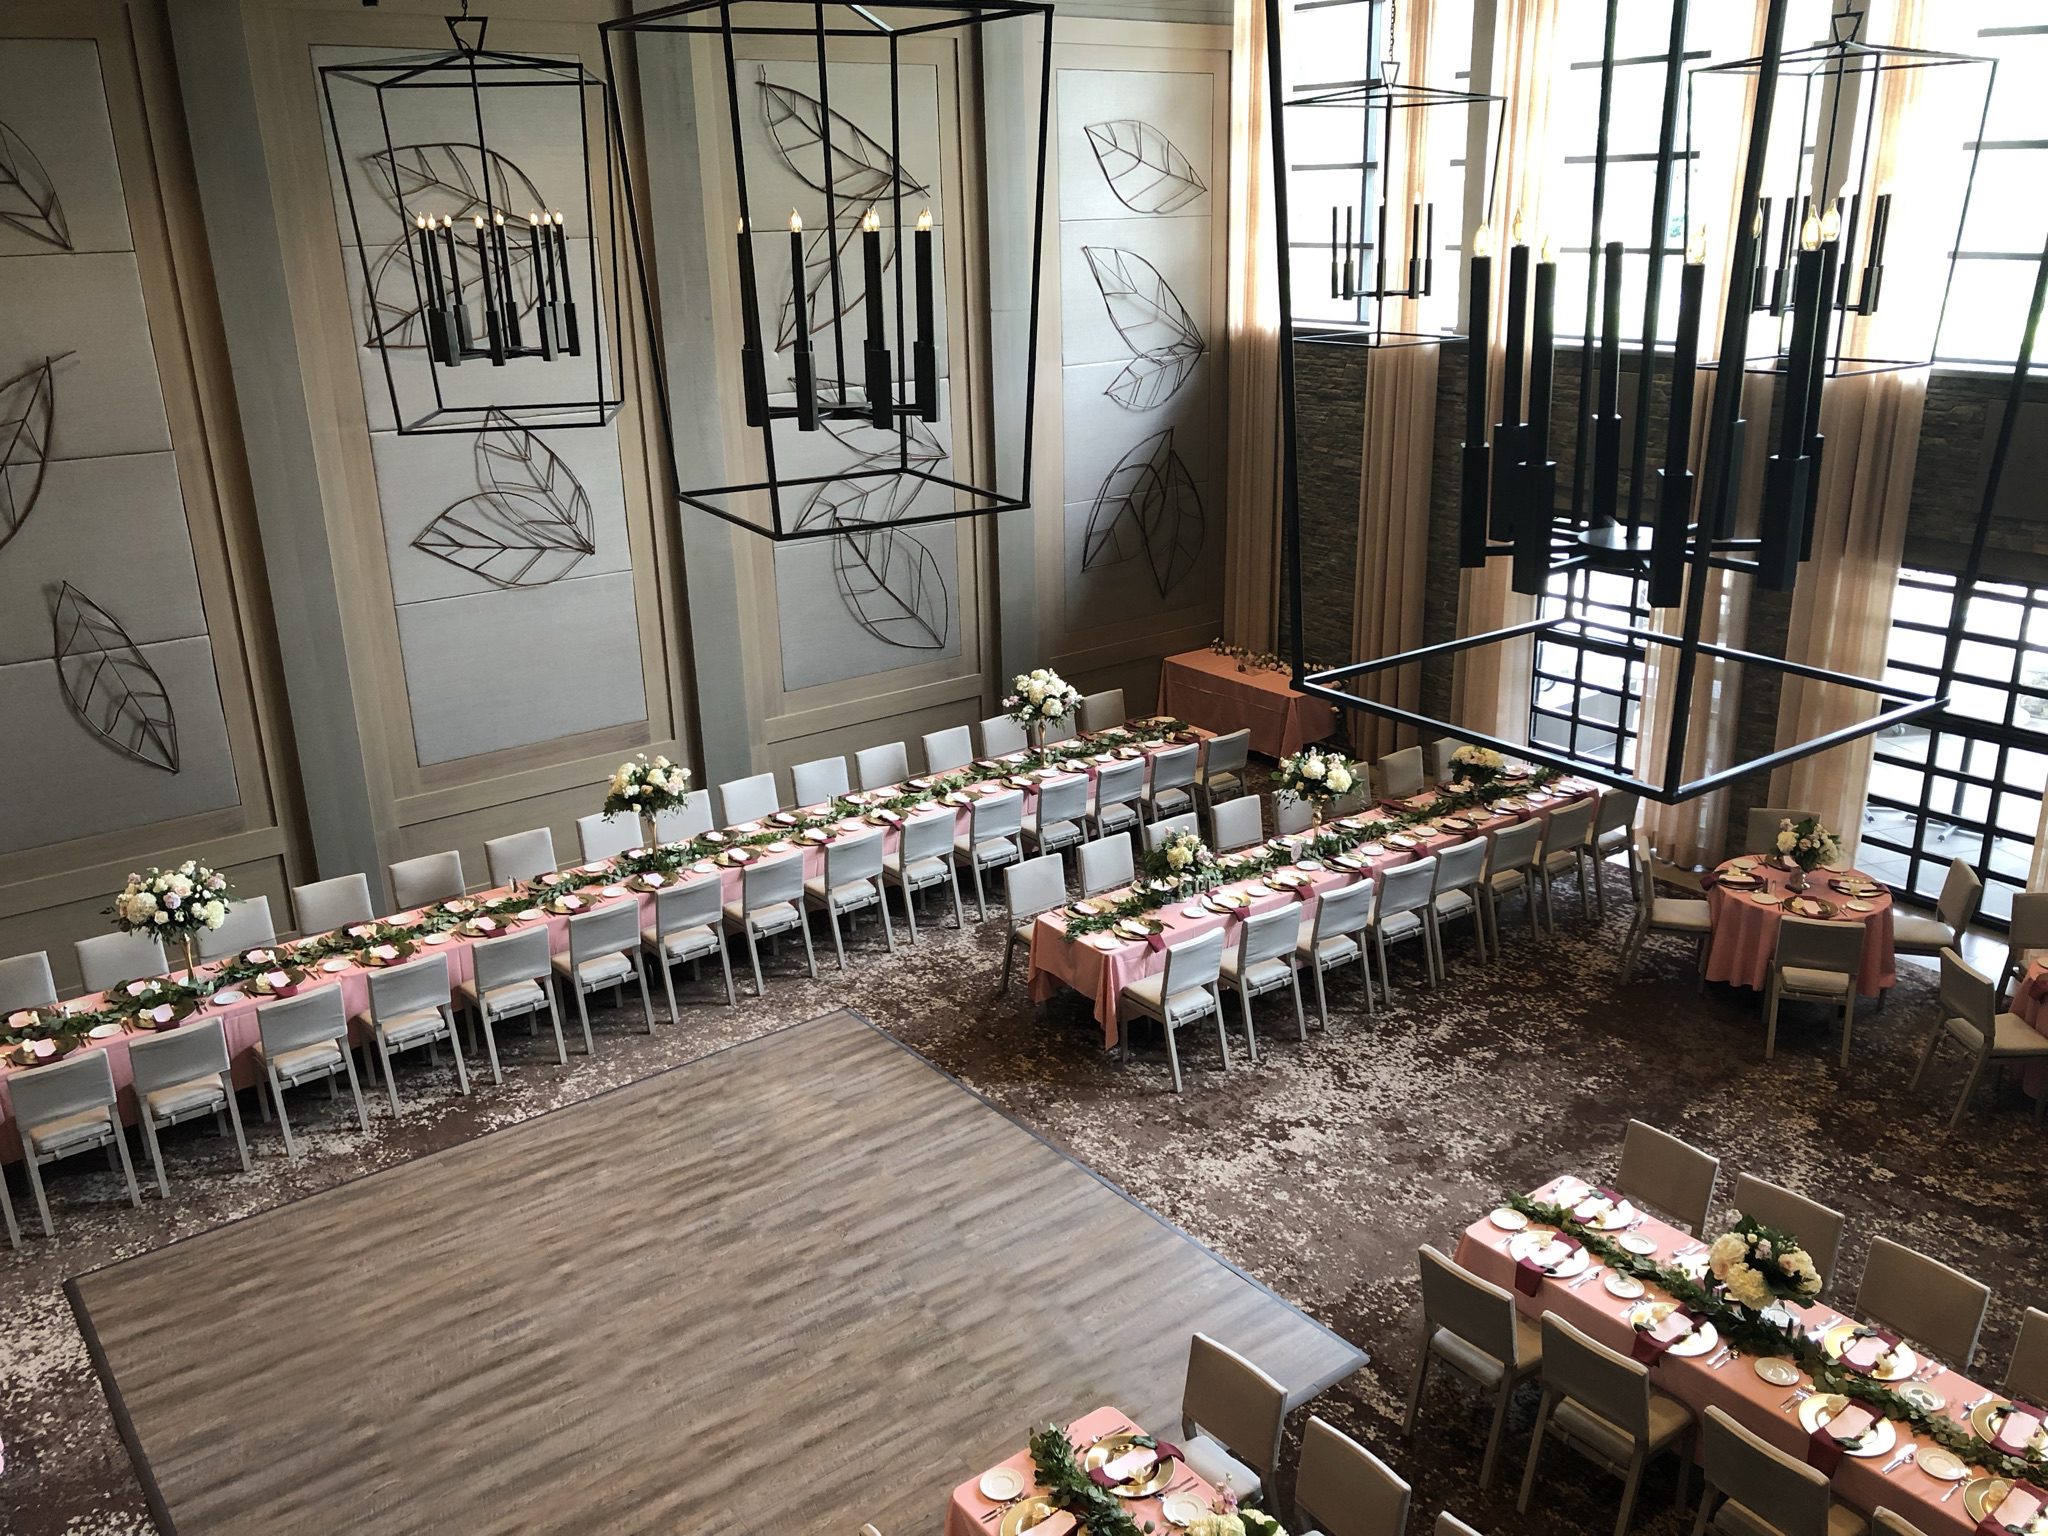 Event Space from above set for wedding